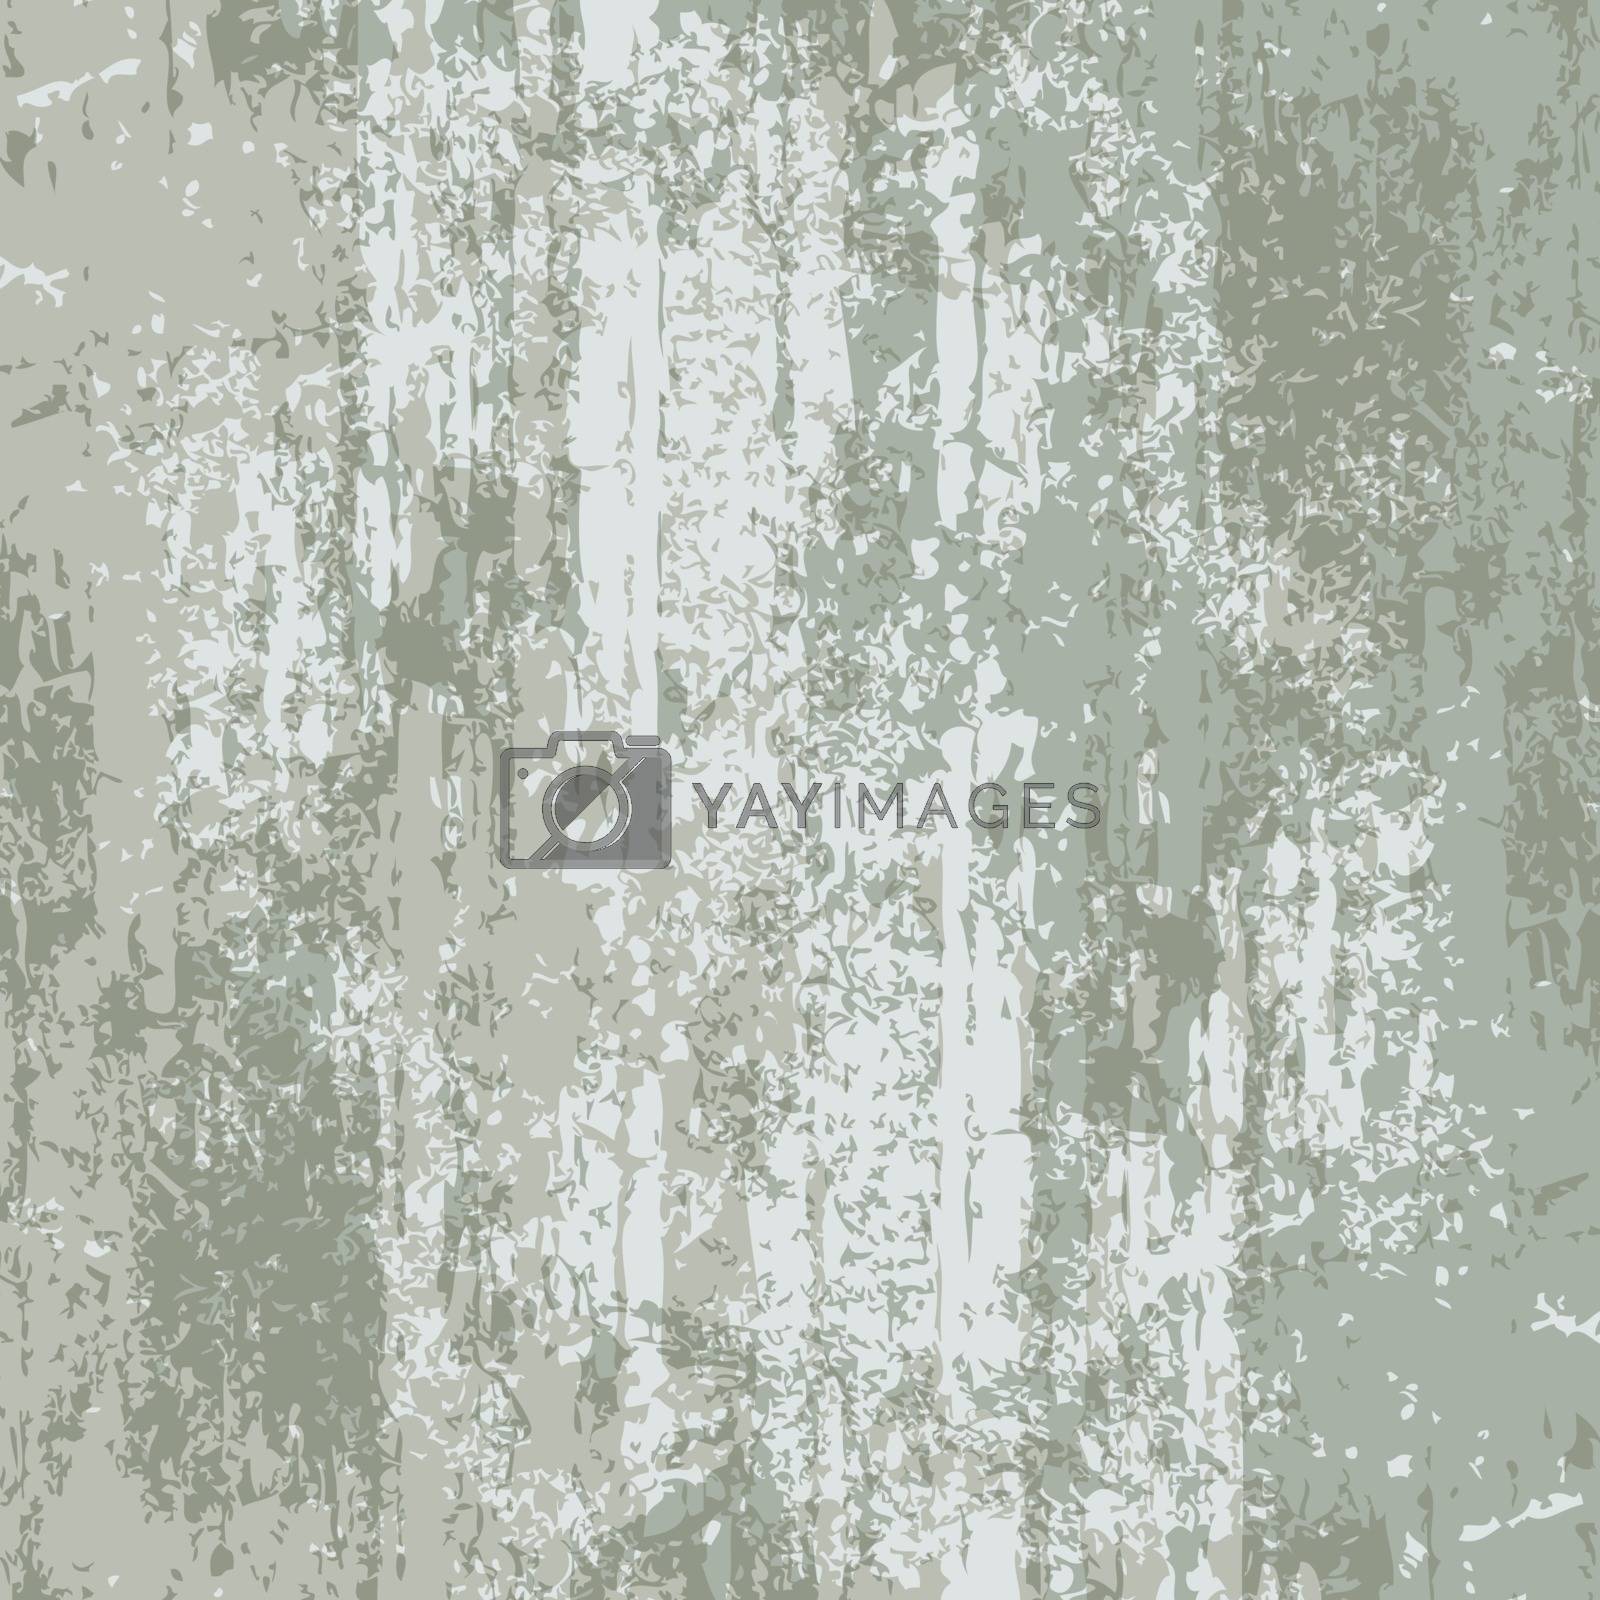 Royalty free image of grunge textured background, vector illustration by nubephoto